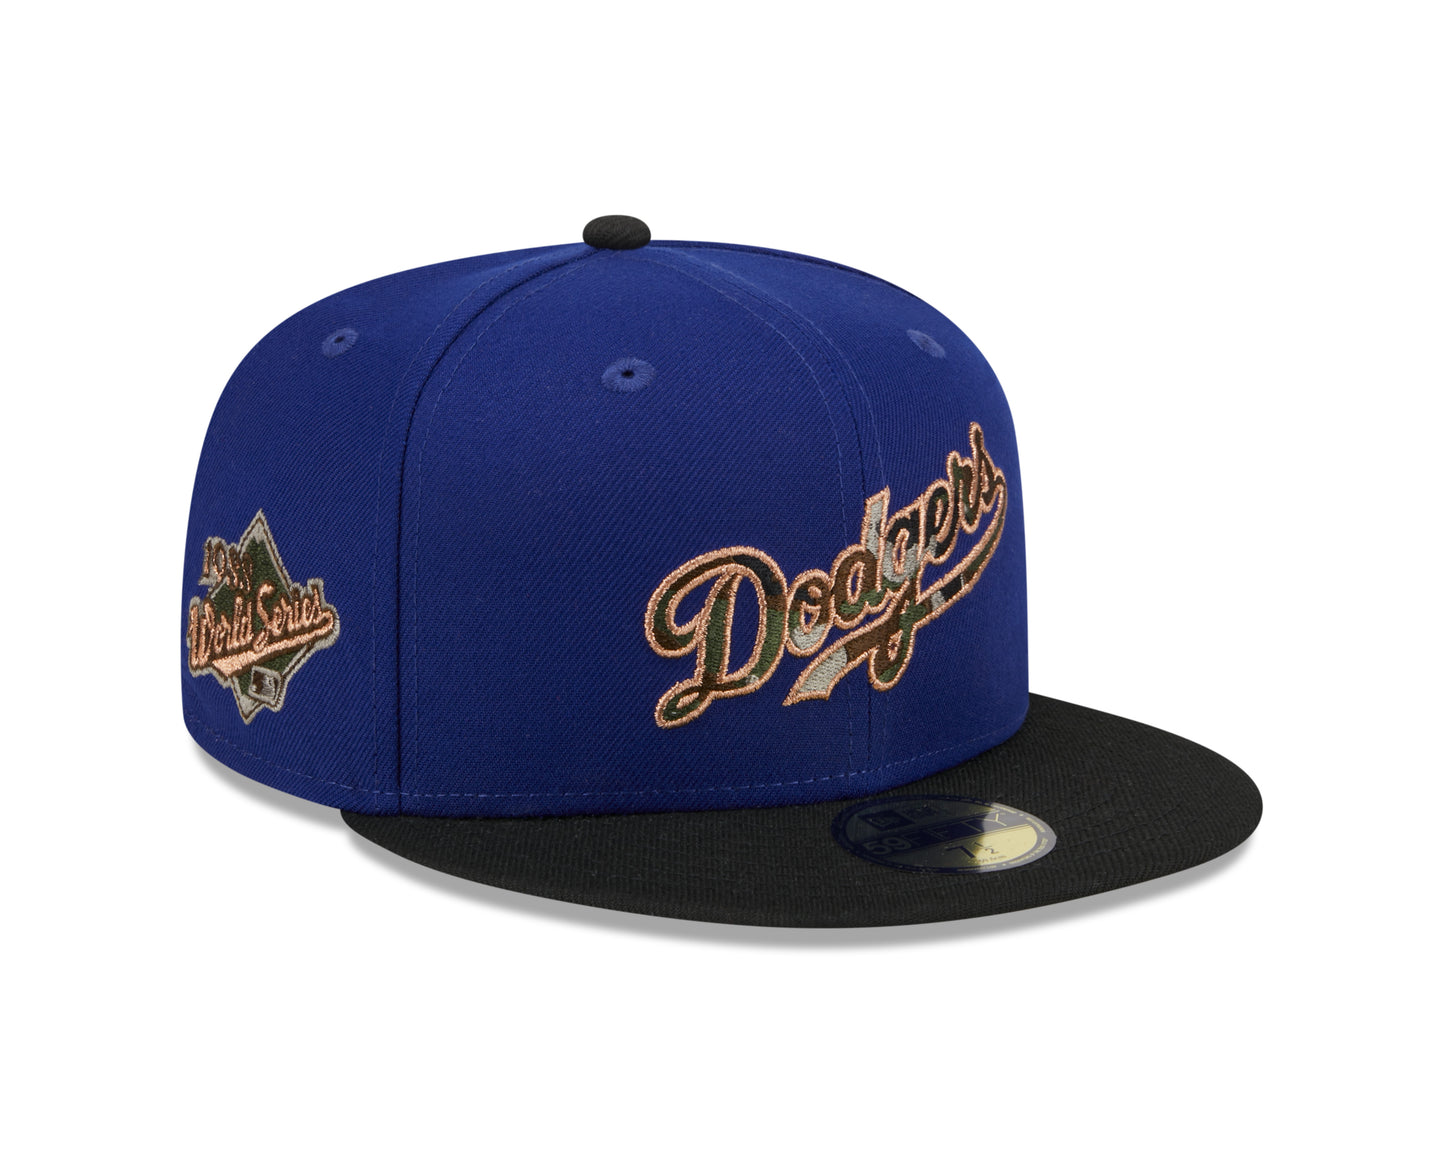 New Era - CAMO FILL - 59fifty Fitted Cap - Los Angeles Dodgers - Blue - Headz Up 